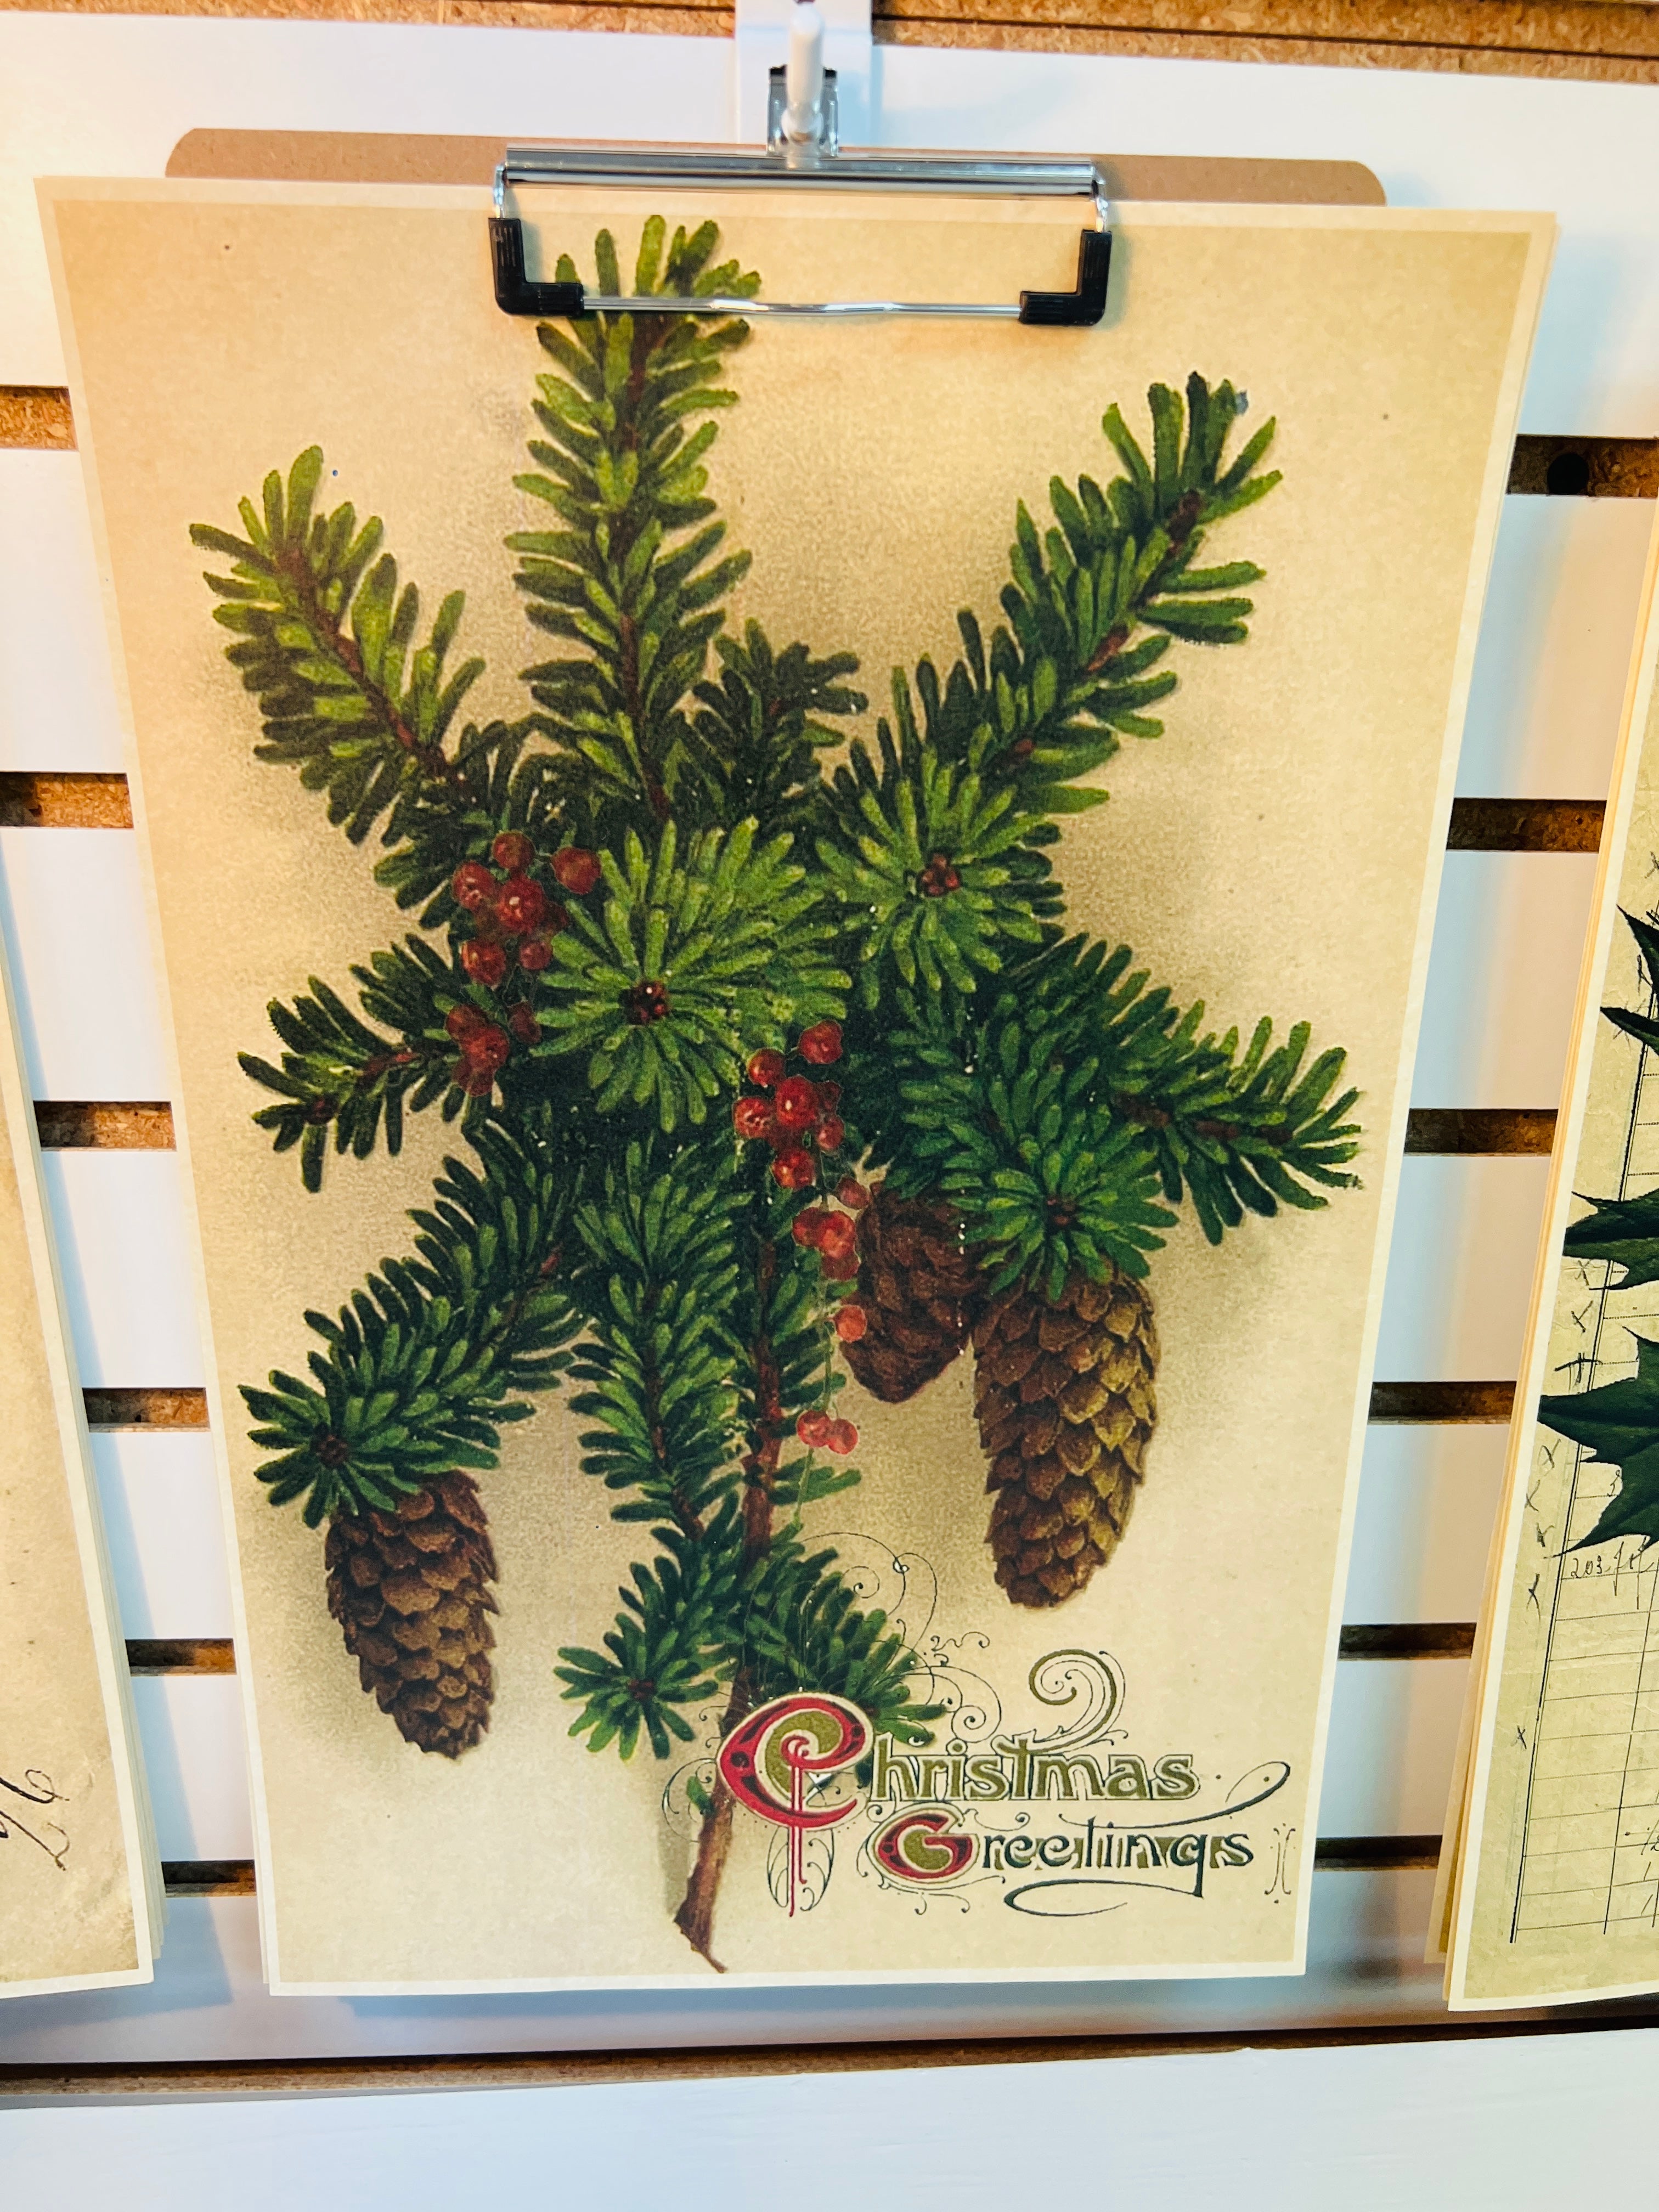 Christmas greenery with pinecones